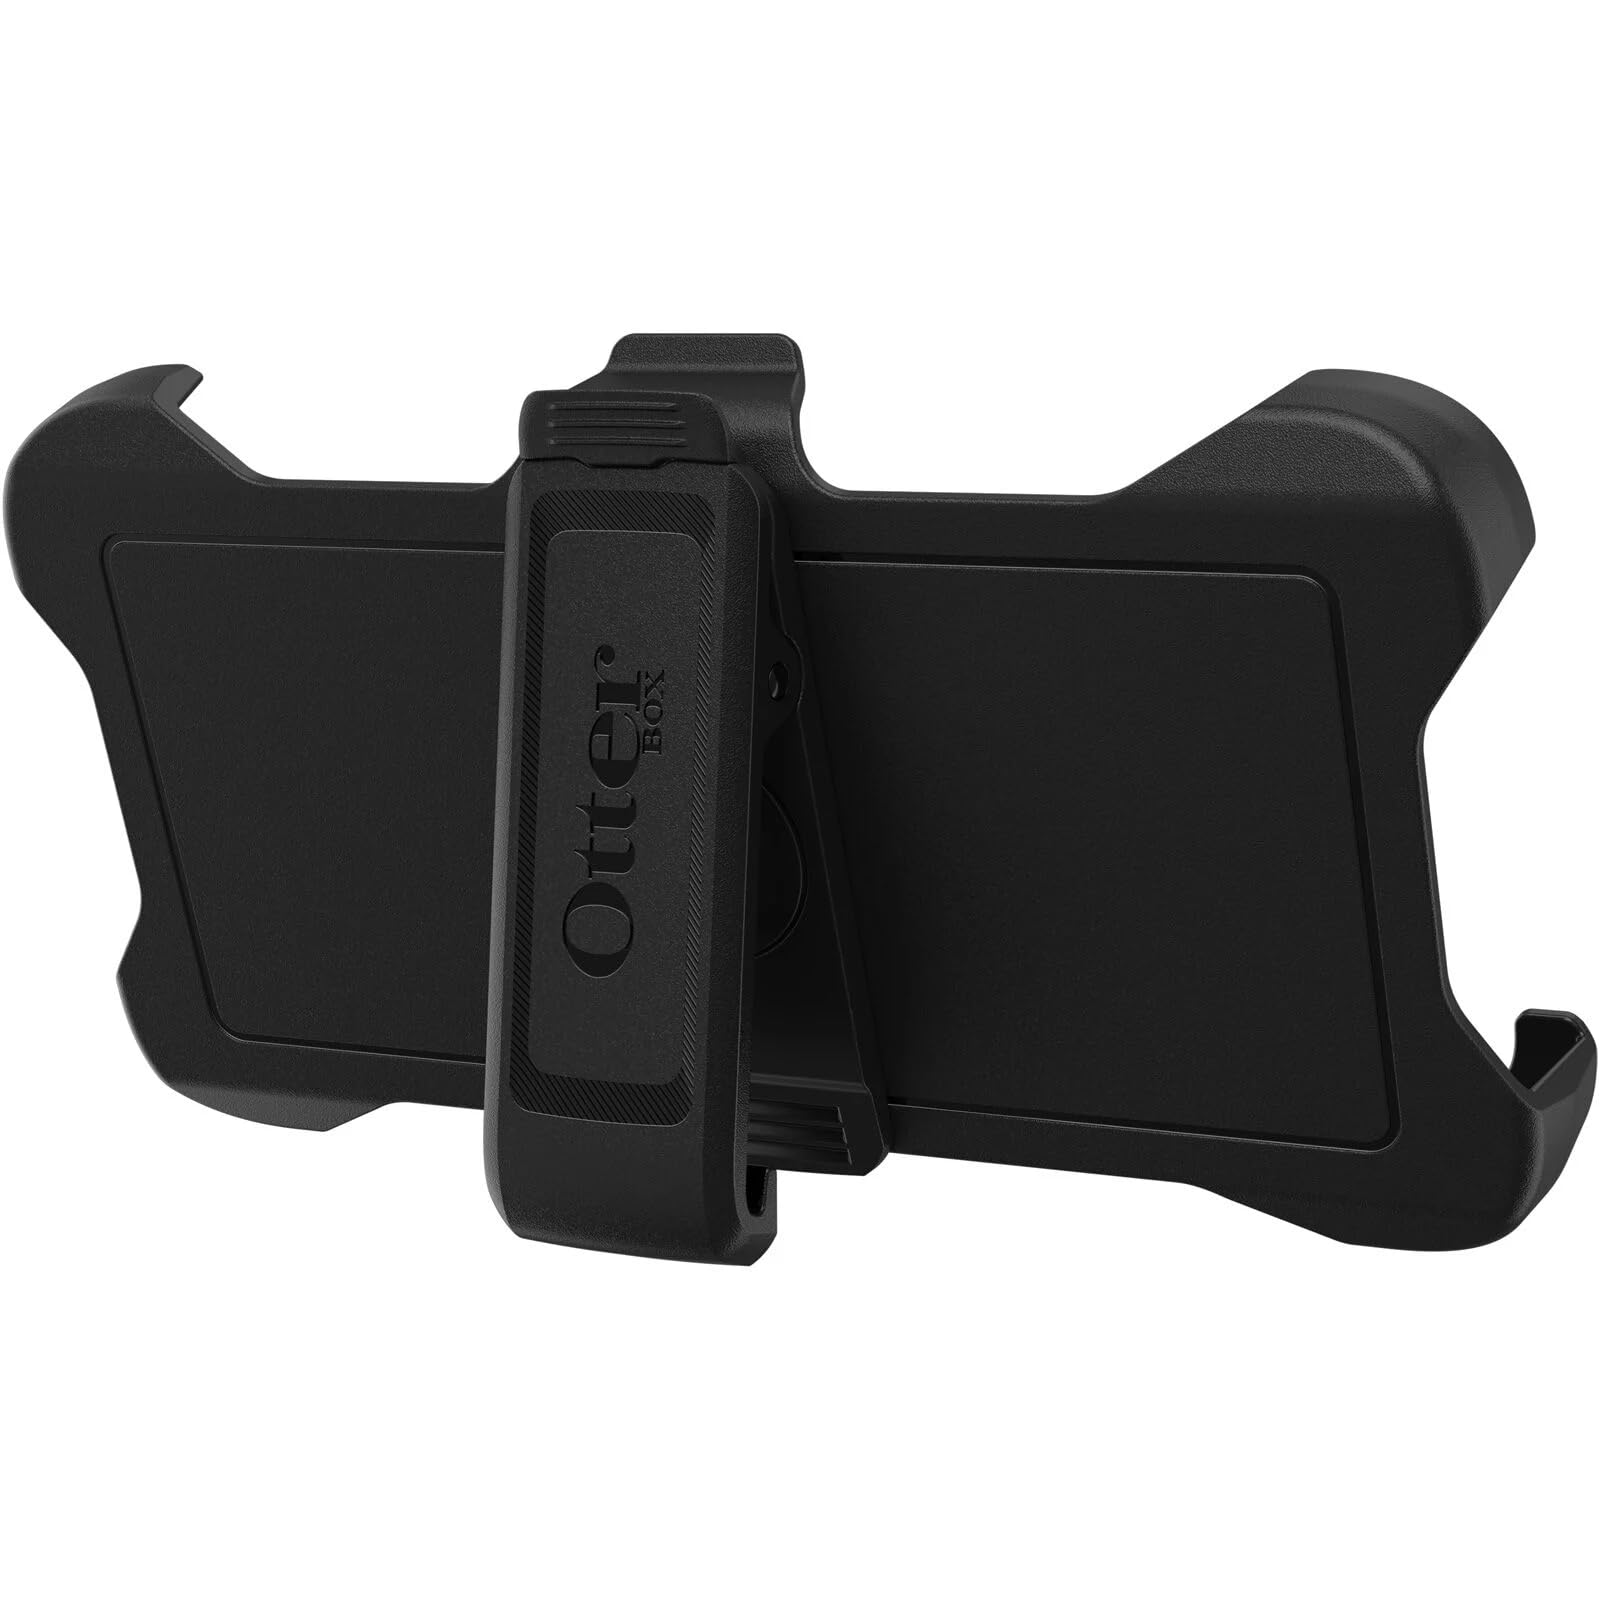 OtterBox Defender Series Holster Belt Clip Replacement for Galaxy S23 Ultra (Only) - Non-Retail Packaging - Black - 2 Pack